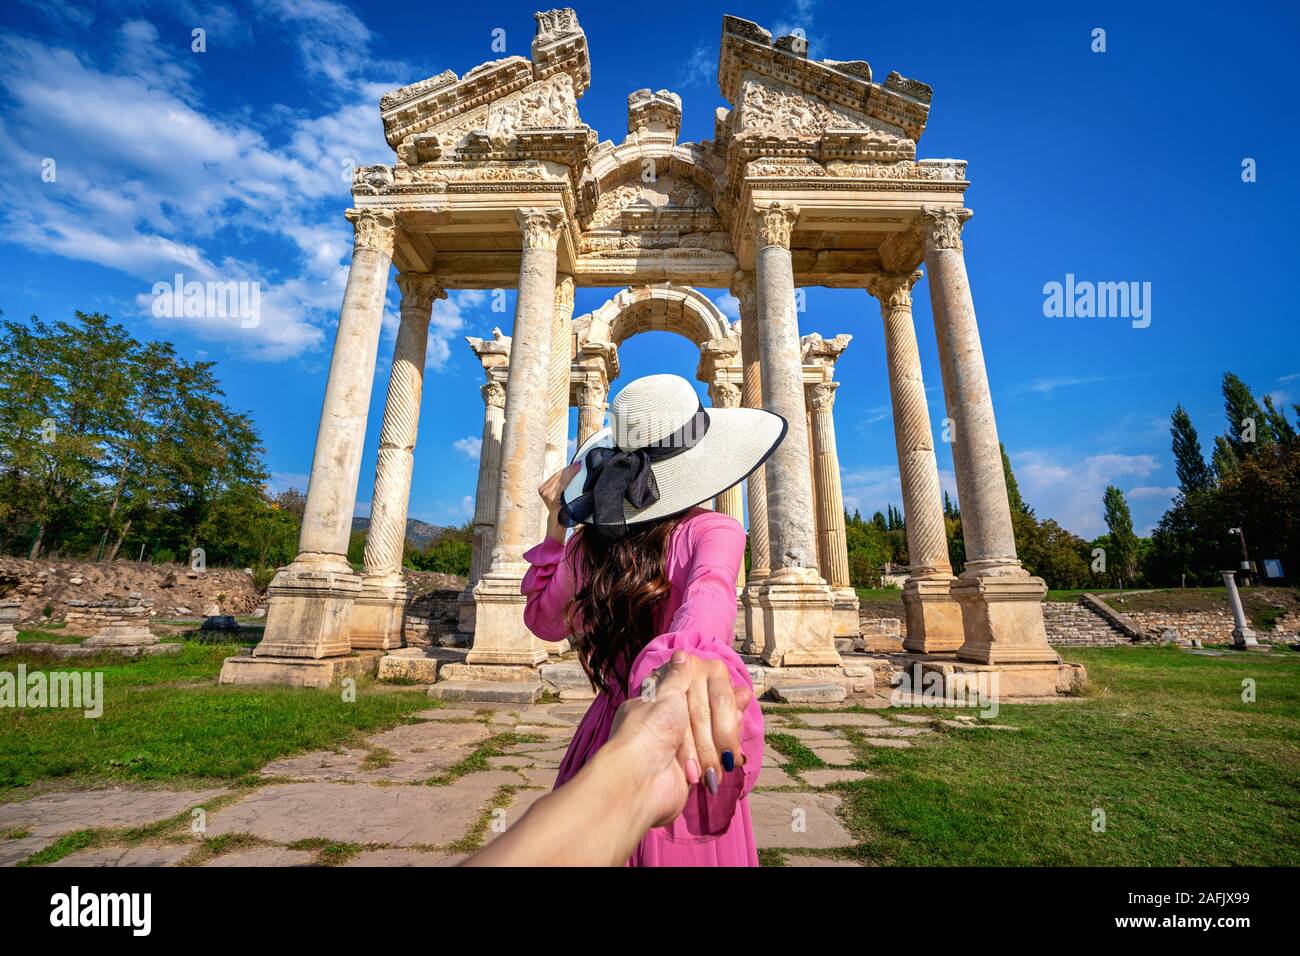 Women tourists holding man's hand and leading him to Aphrodisias ancient city in Turkey. Stock Photo